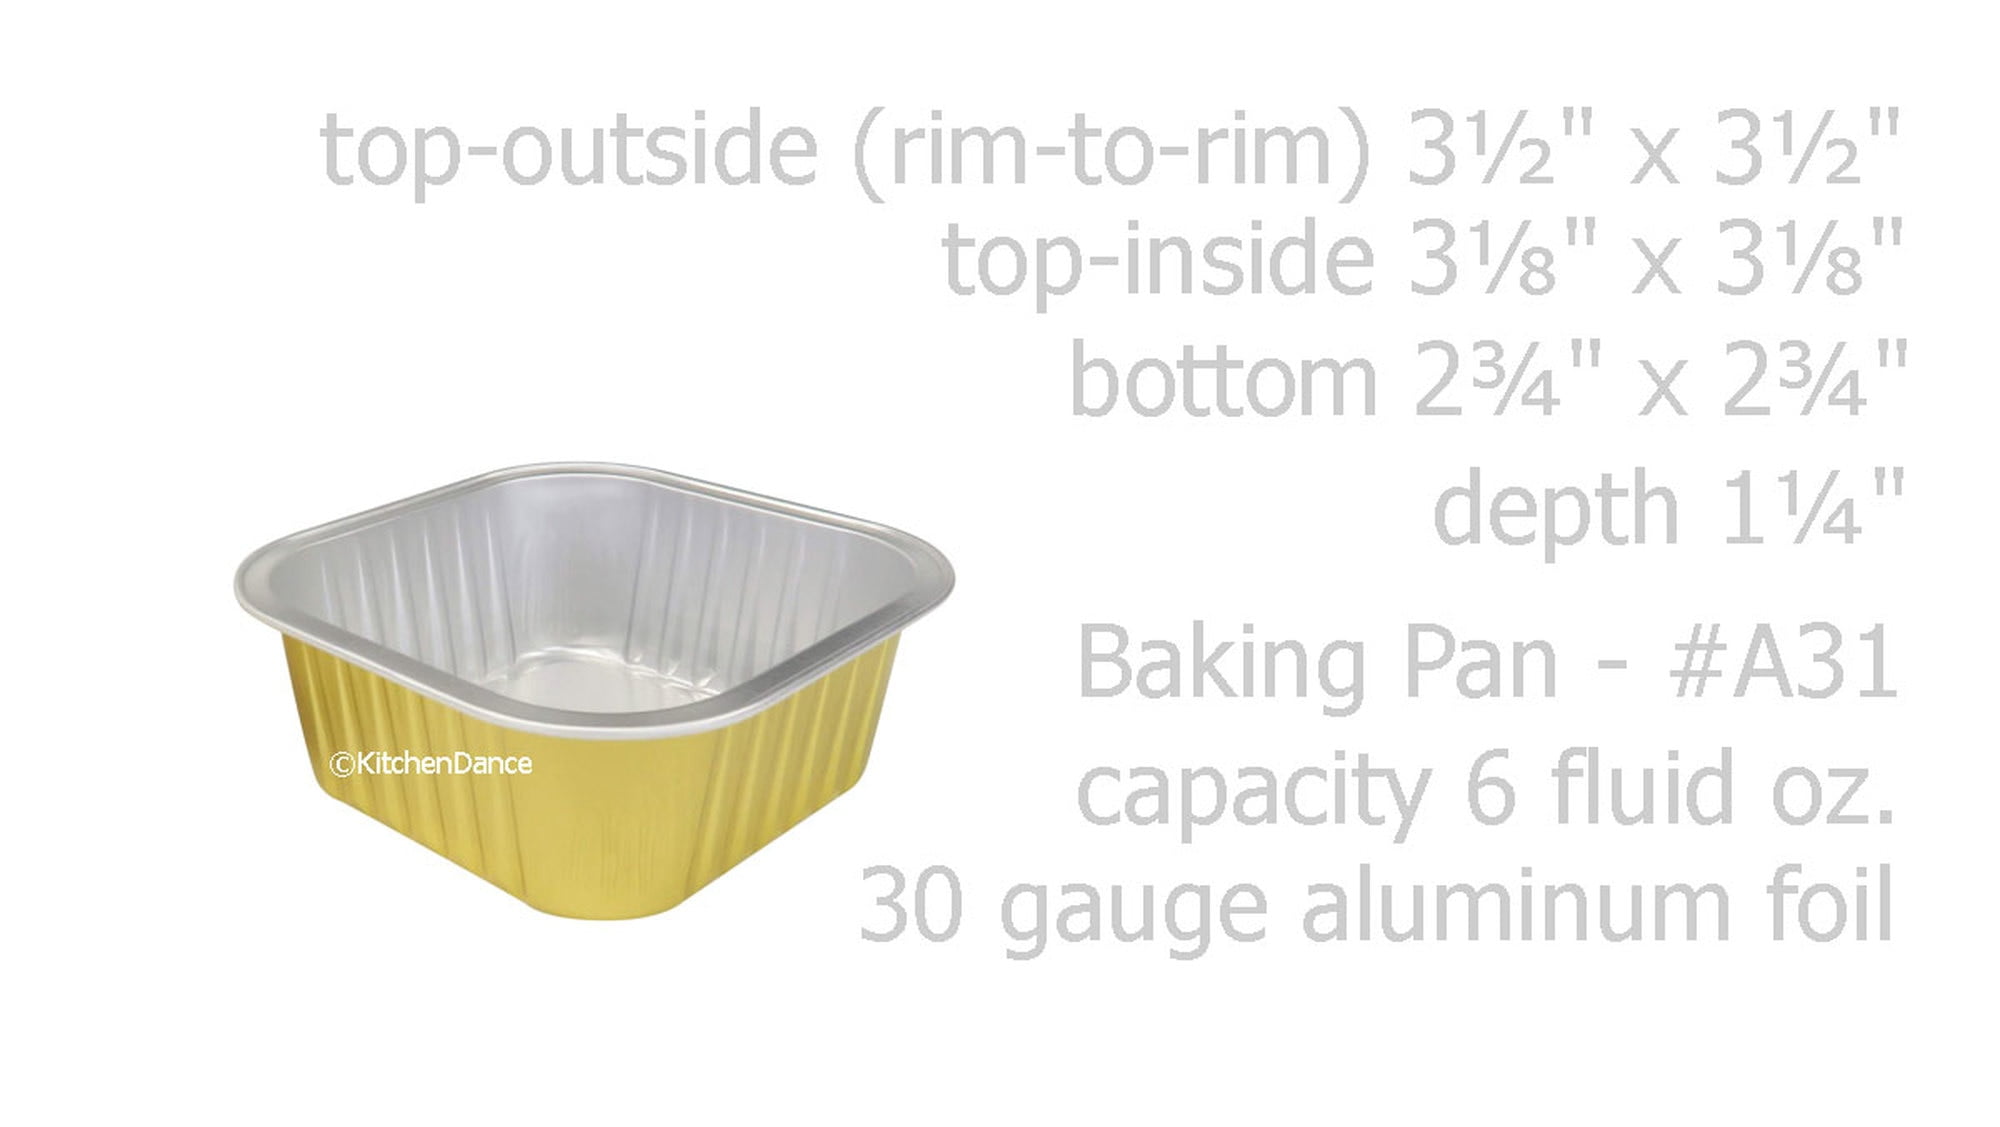 LIDS PERFECT FOR TAKEAWAYS M P 500 x No 2 ALUMINIUM FOIL FOOD CONTAINERS